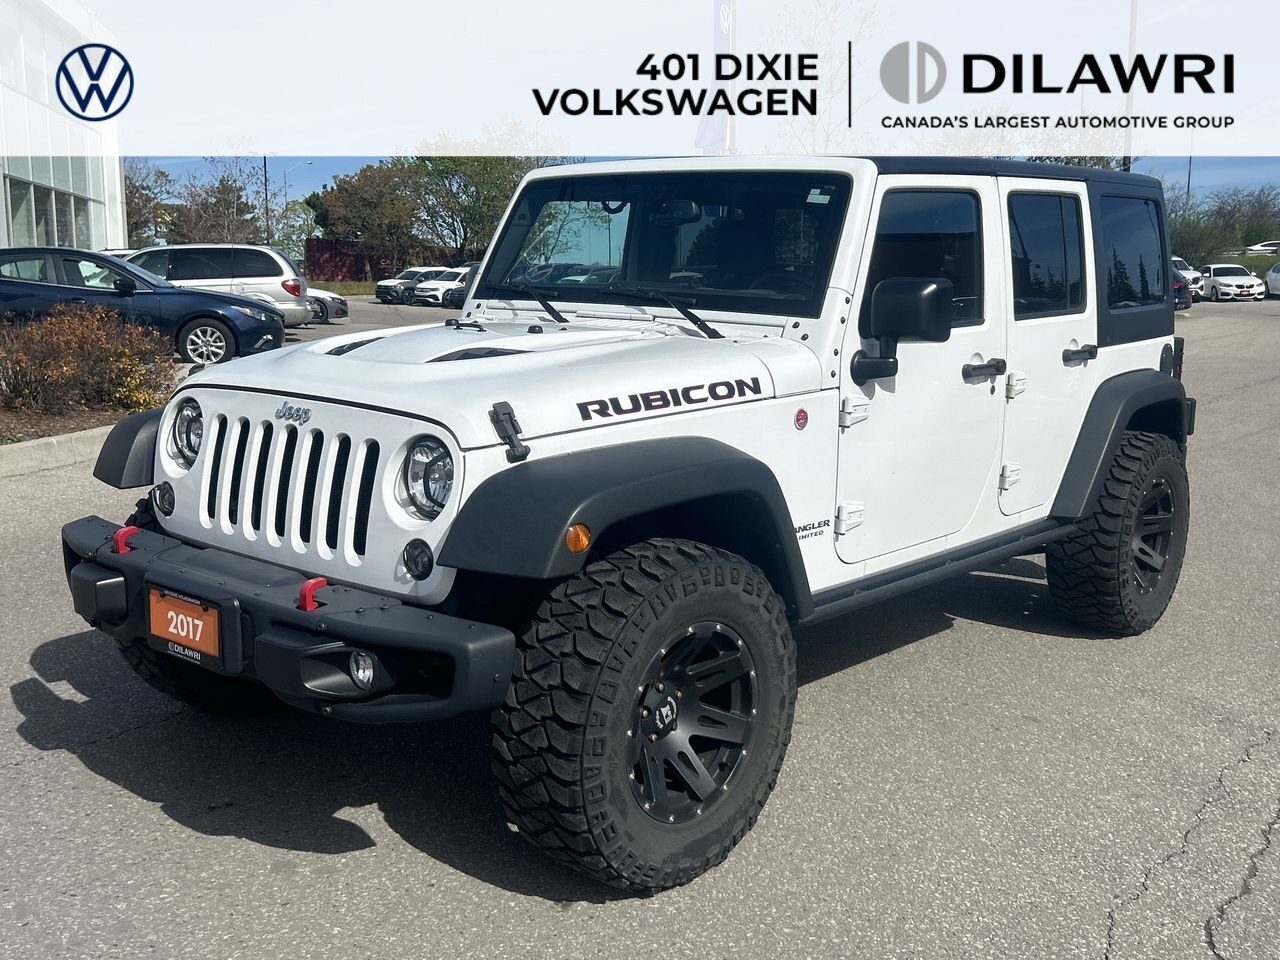 2017 Jeep WRANGLER UNLIMITED Rubicon Hard Rock One Owner| Clean Carfax| Manual 